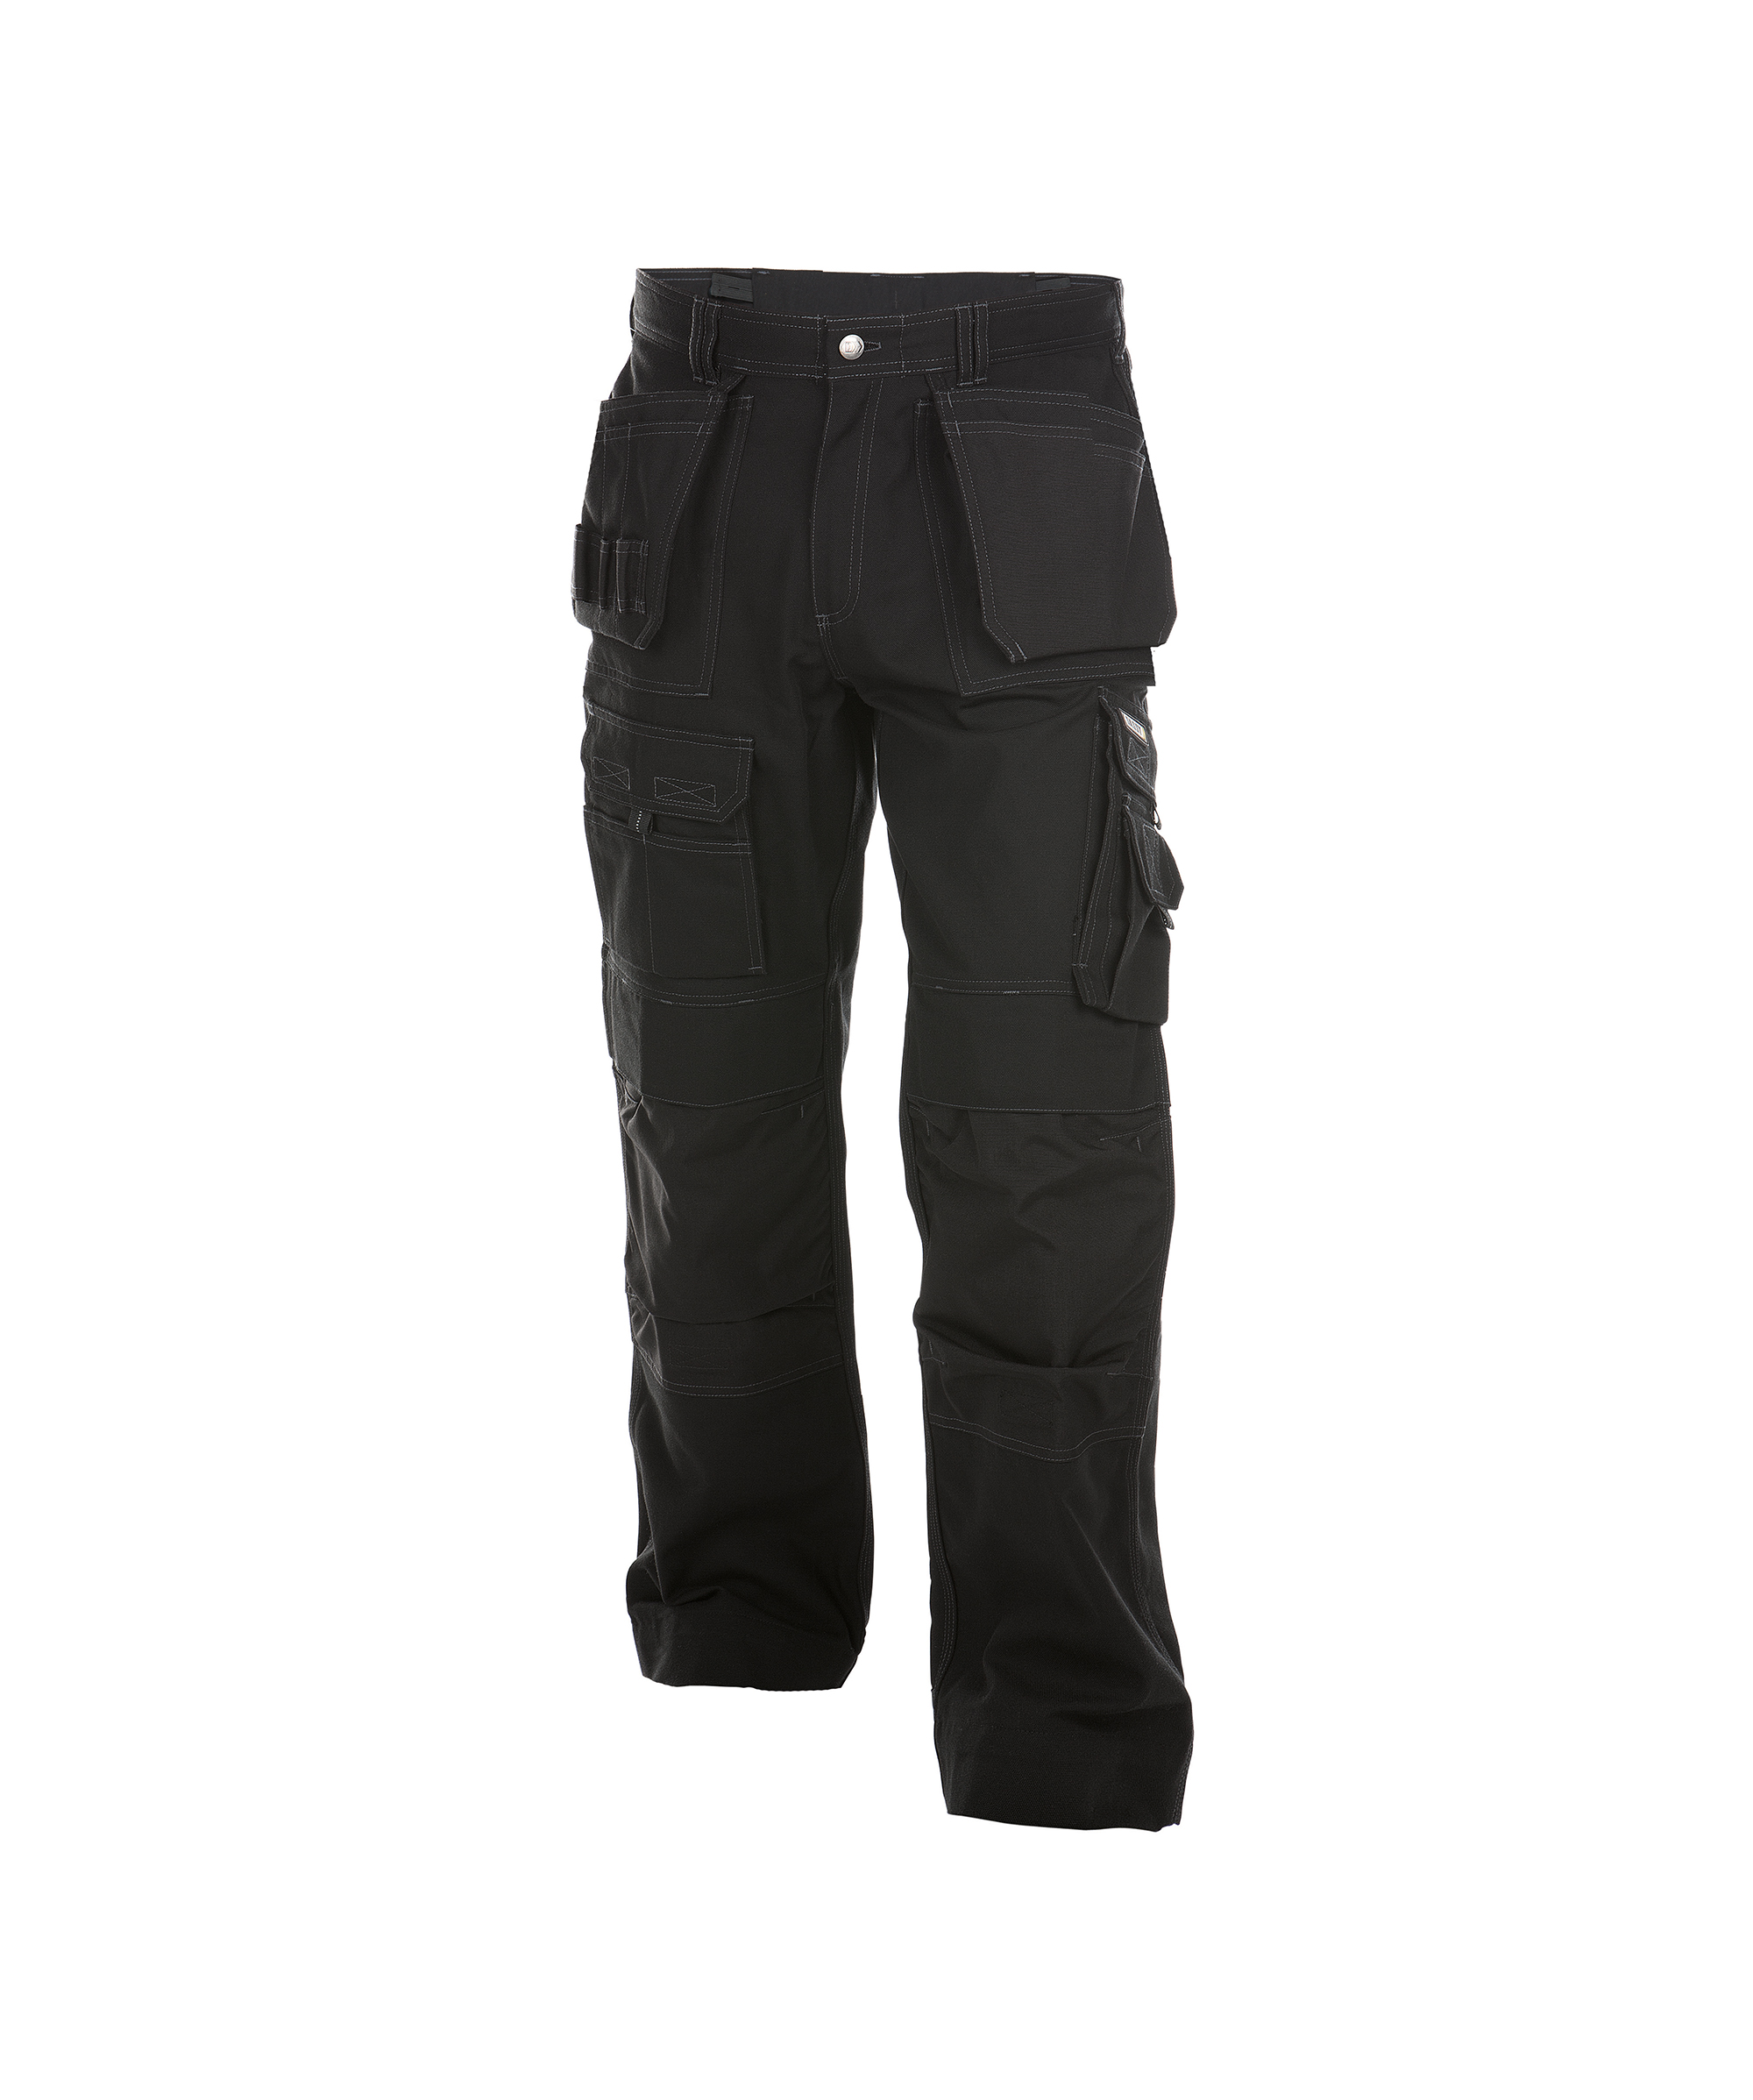 texas_canvas-work-trousers-with-multi-pockets-and-knee-pockets_black_front.jpg